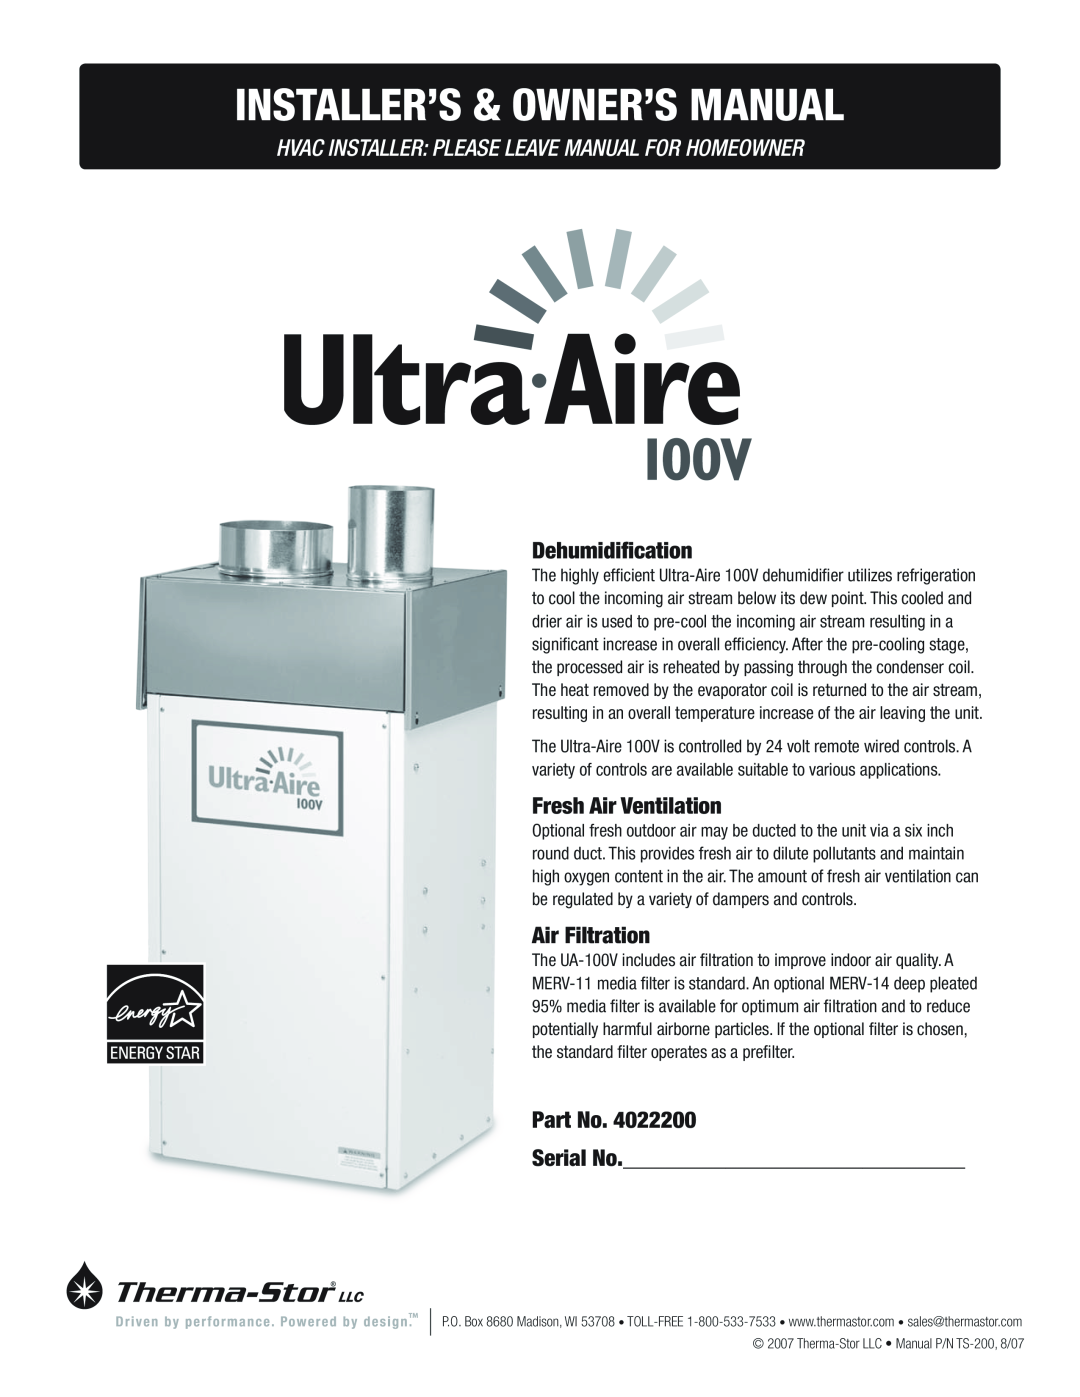 Therma-Stor Products Group Ultra-Aire 100V owner manual Dehumidification, Fresh Air Ventilation, Air Filtration 